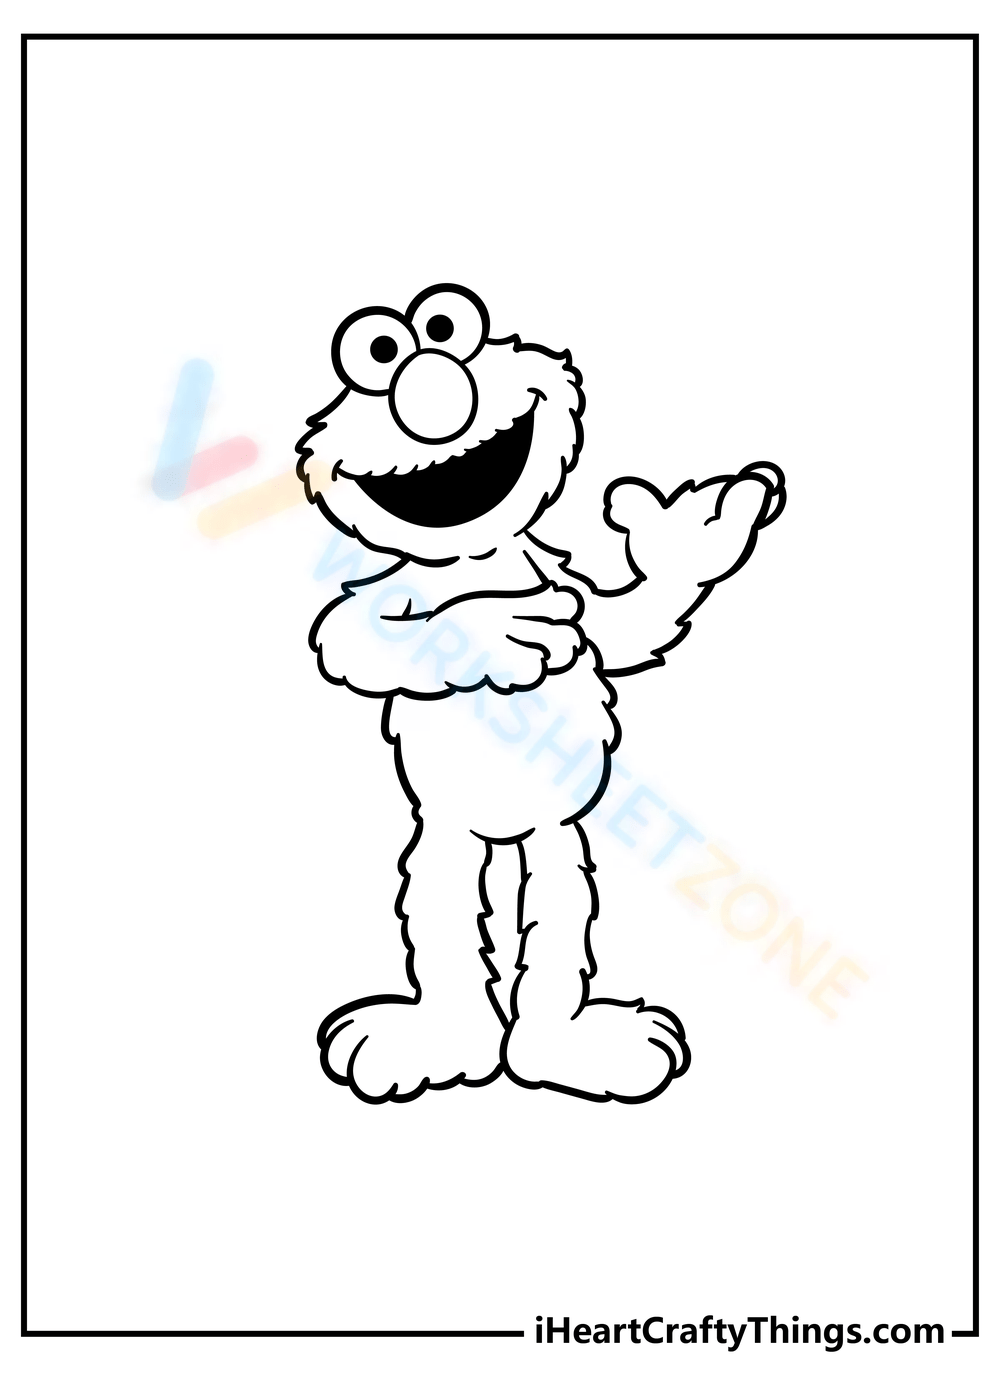 sesame street characters coloring pages elmo